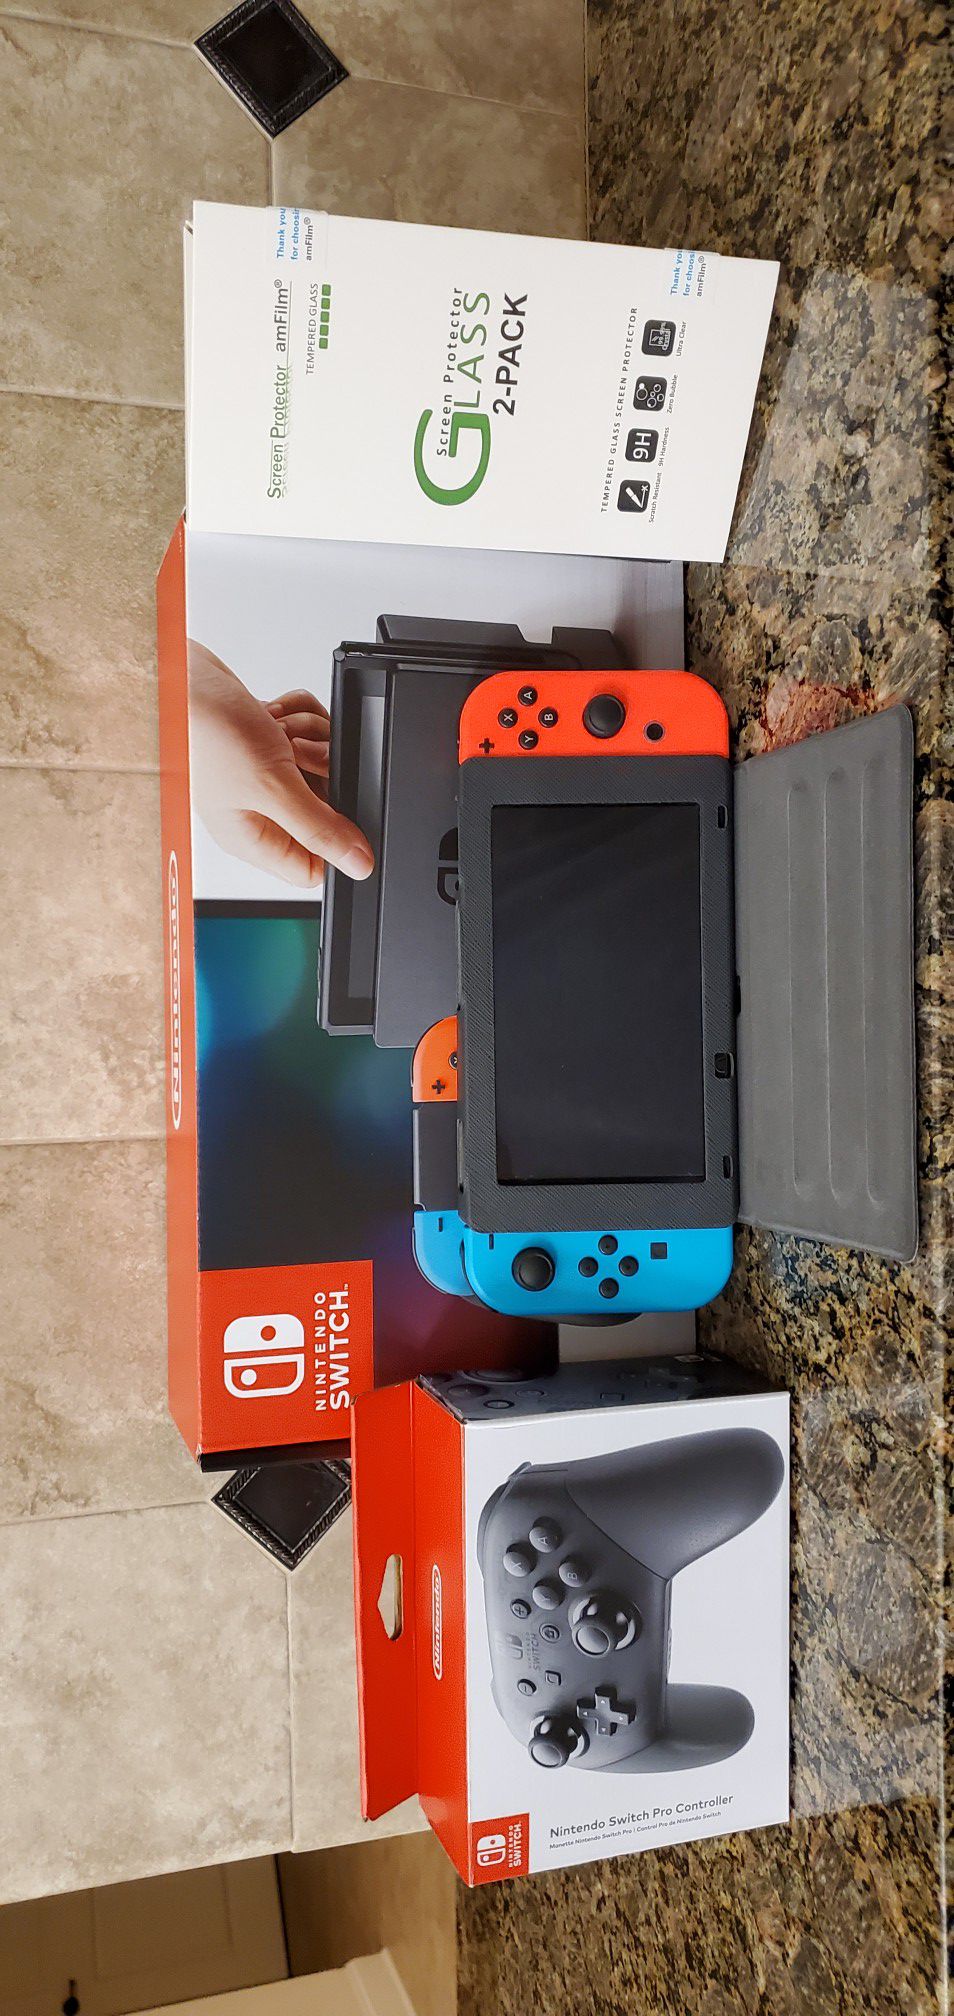 Nintendo Switch with Pro controller and extras (negotiable)